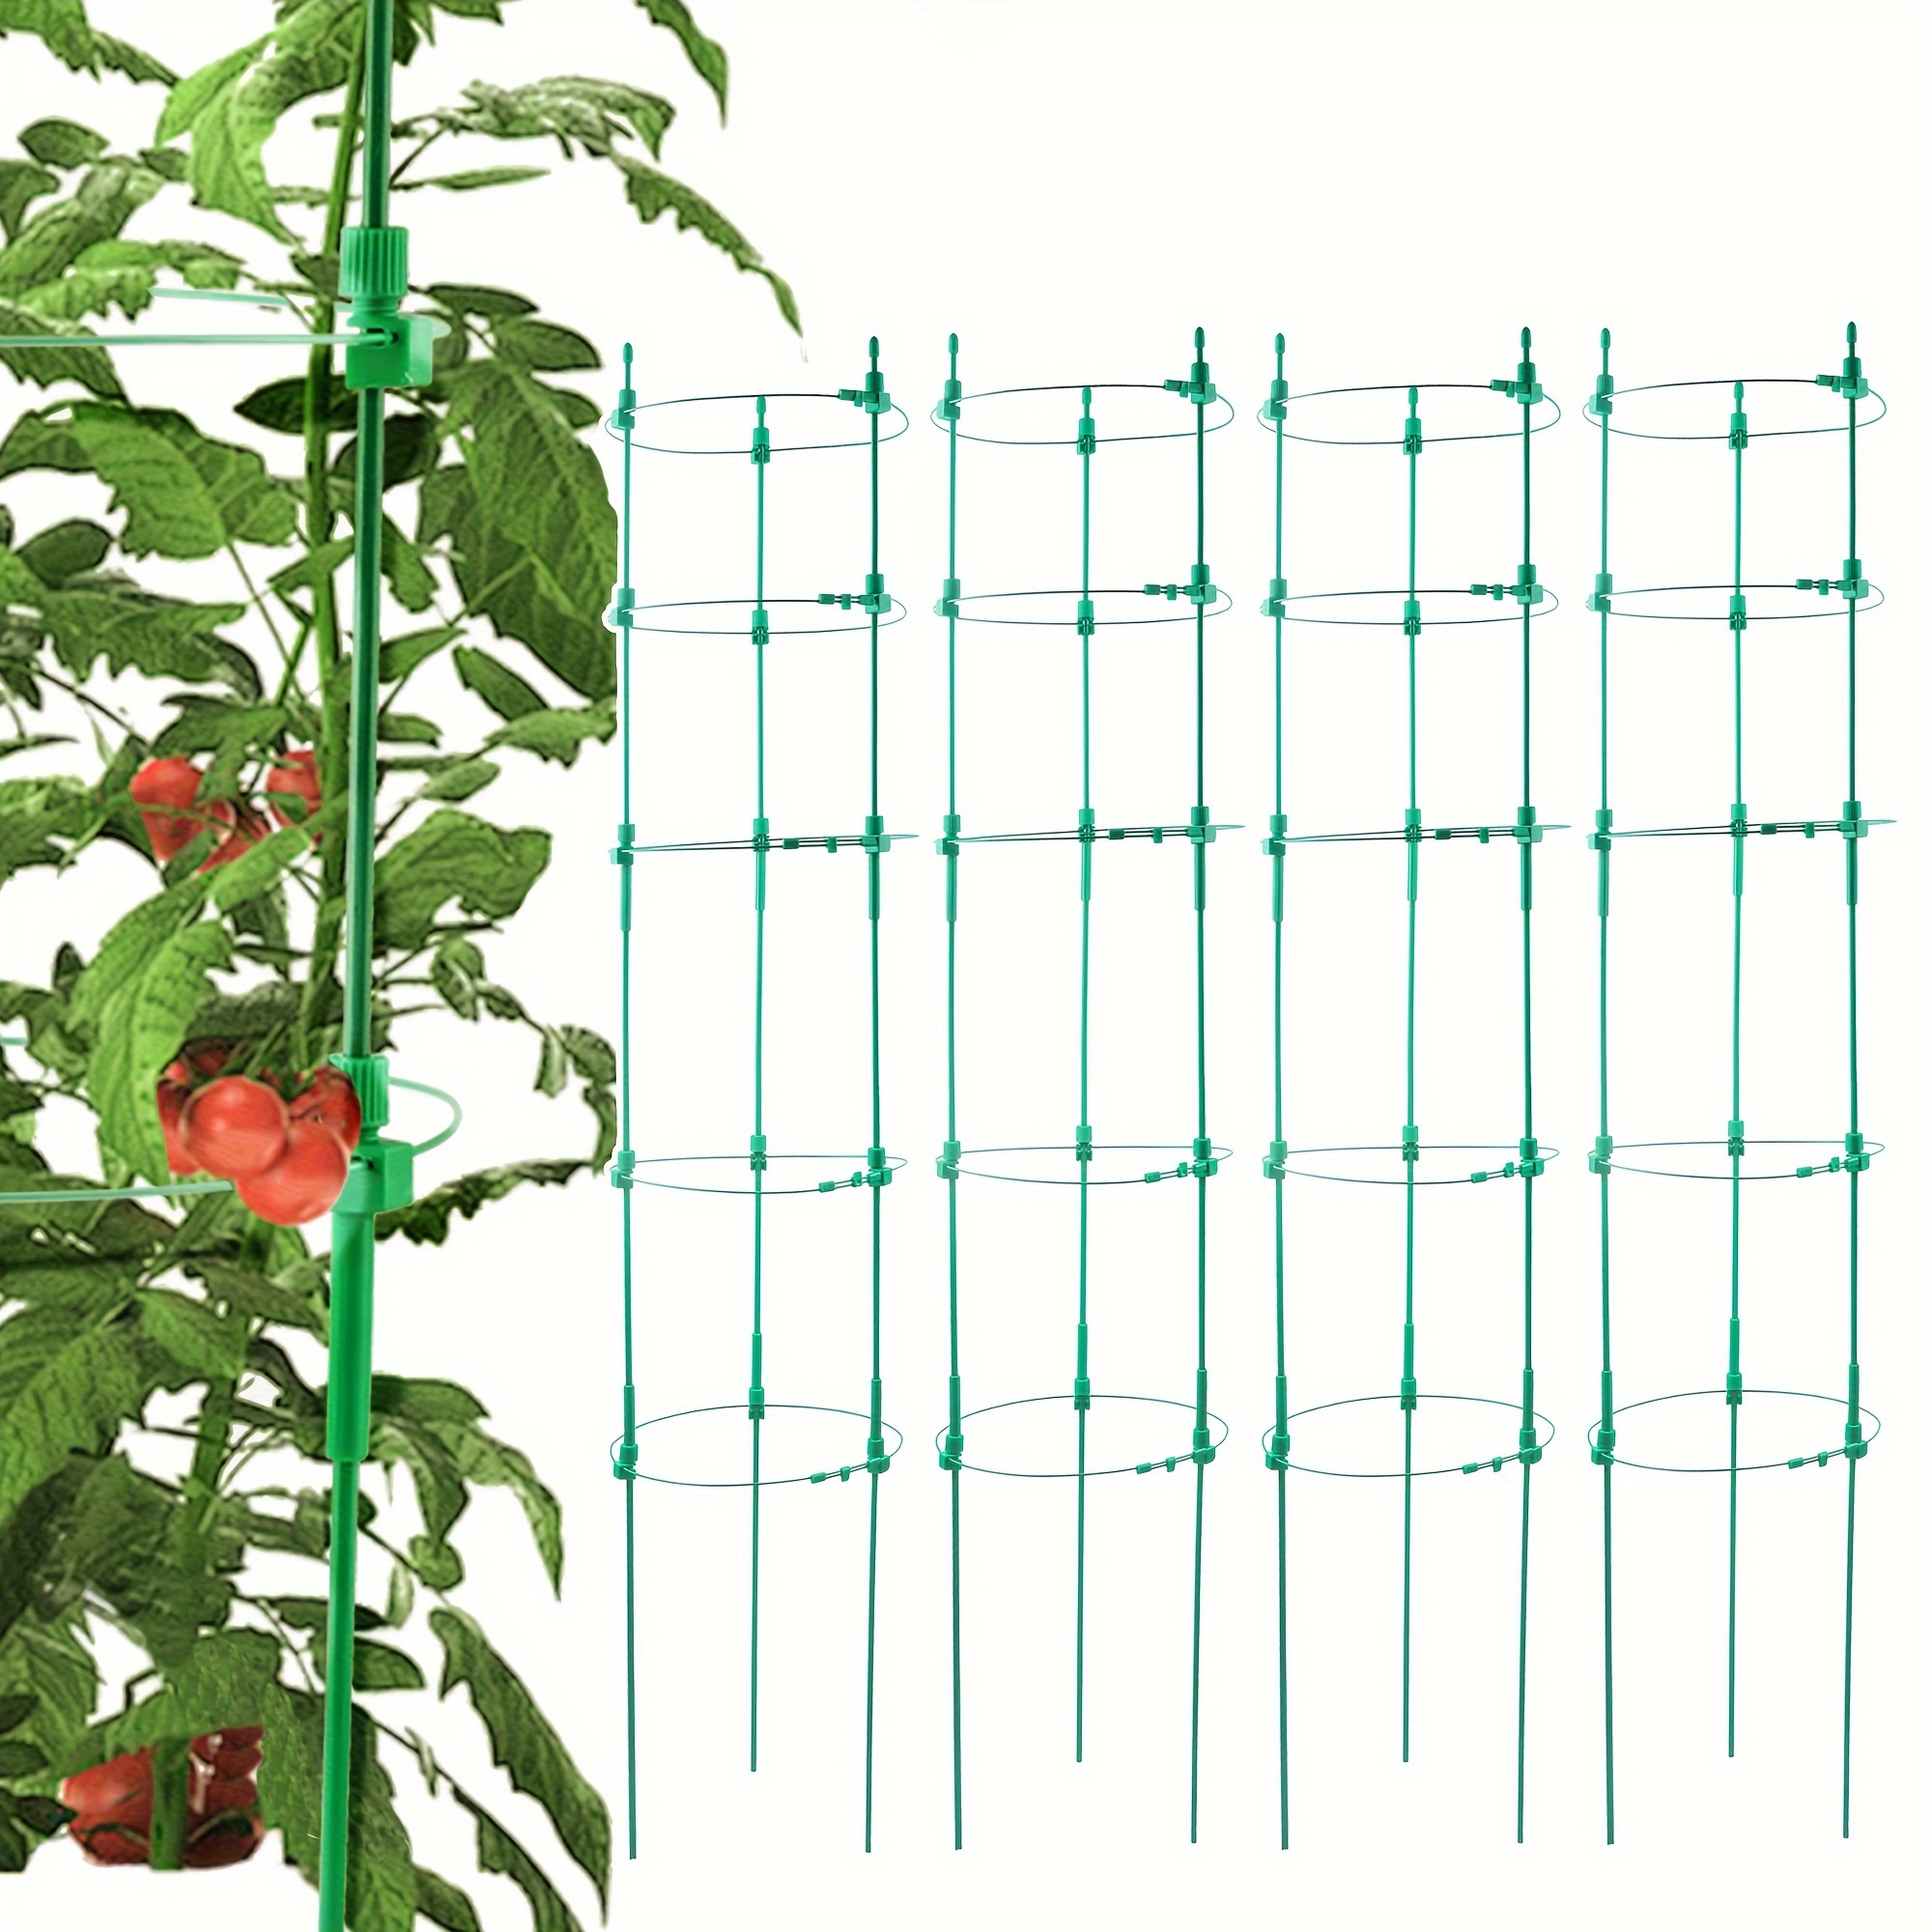 

Upgrade Tomato Cage For Garden, 53 Inches 4 Pack Adjustable Tall Tomato Plant Support Cages, Tomato Stakes Garden Trellis For Vegetables, Climbing Plants, Cucumber, Flowers, Fruit